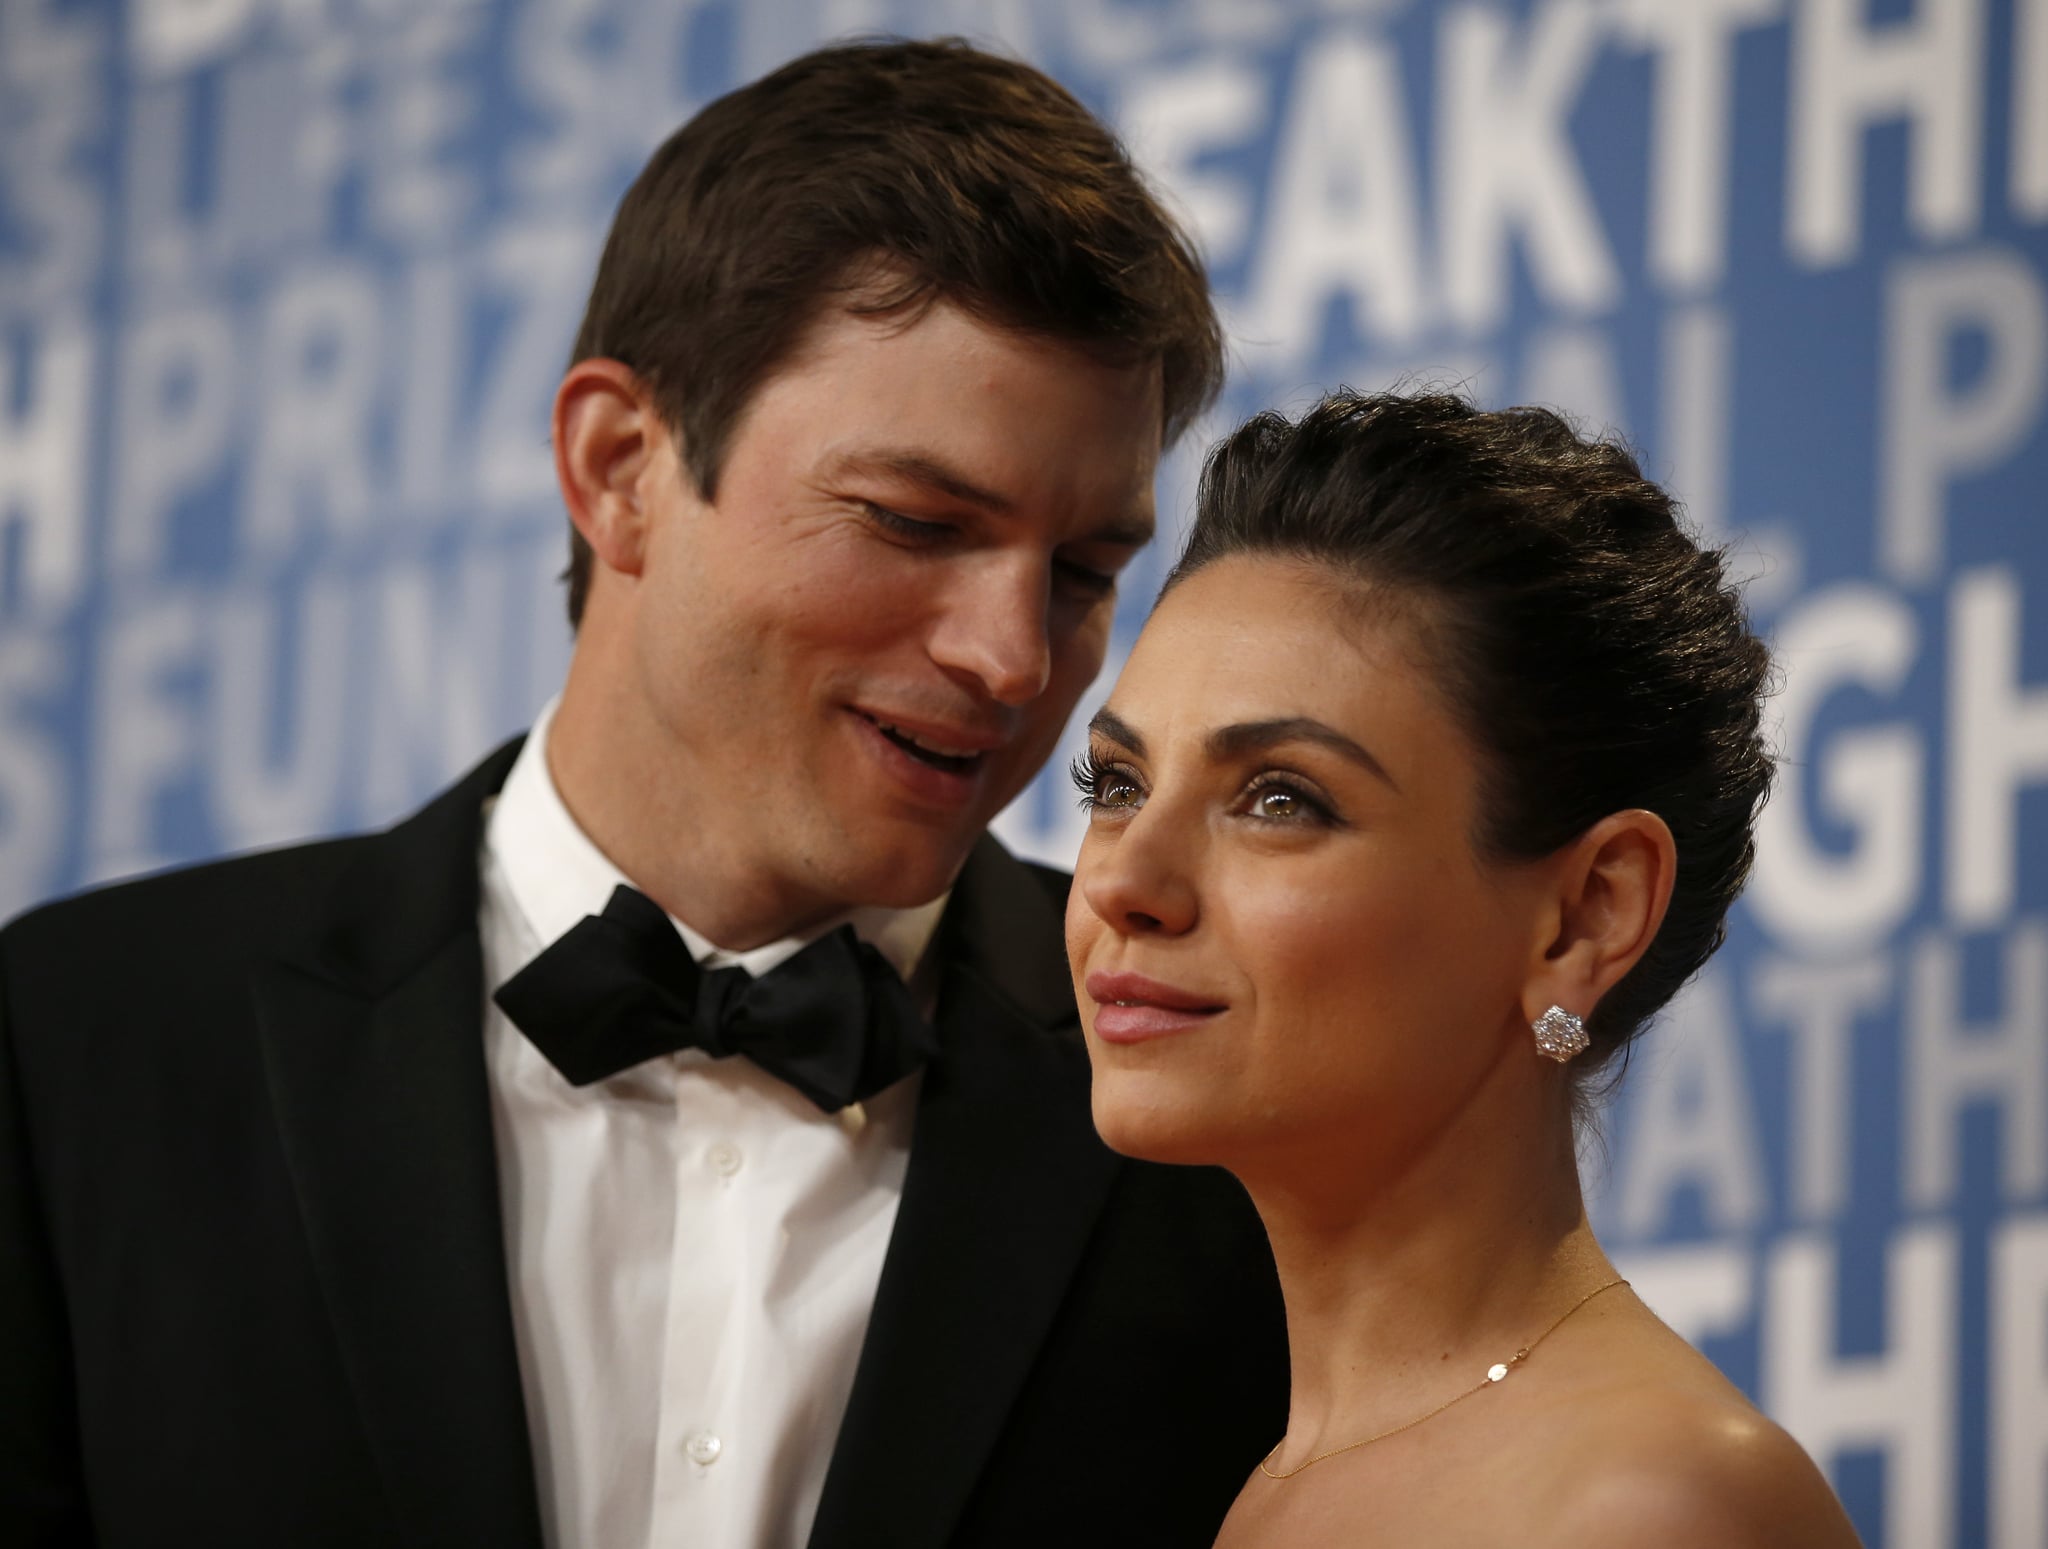 Actor Mila Kunis poses for a picture with her husband actress Ashton Kutcher on the red carpet for the 6th annual 2018 Breakthrough Prizes at Moffett Federal Airfield, Hangar One in Mountain View, Calif., on Sunday, Dec. 3, 2017. (Nhat V. Meyer/Bay Area News Group) (Photo by MediaNews Group/Bay Area News via Getty Images)